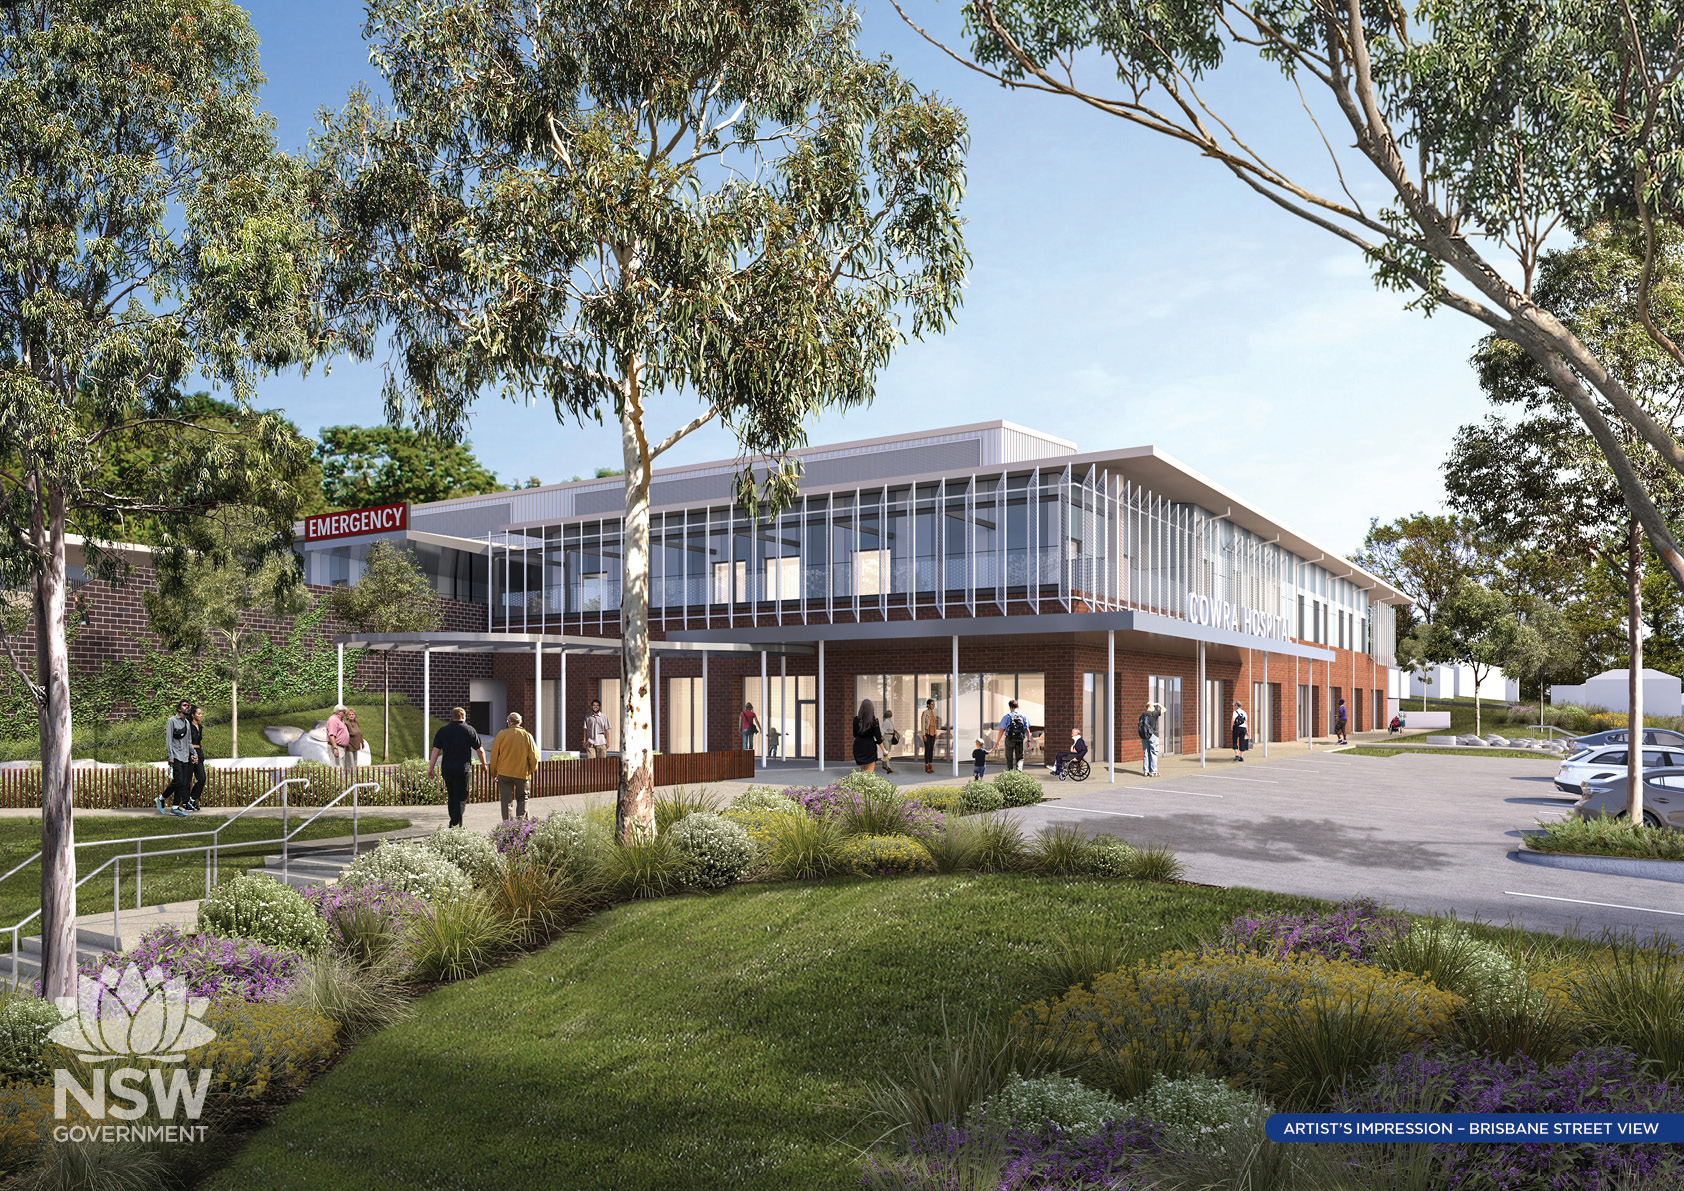 Main works contract awarded for Cowra Hospital Redevelopment